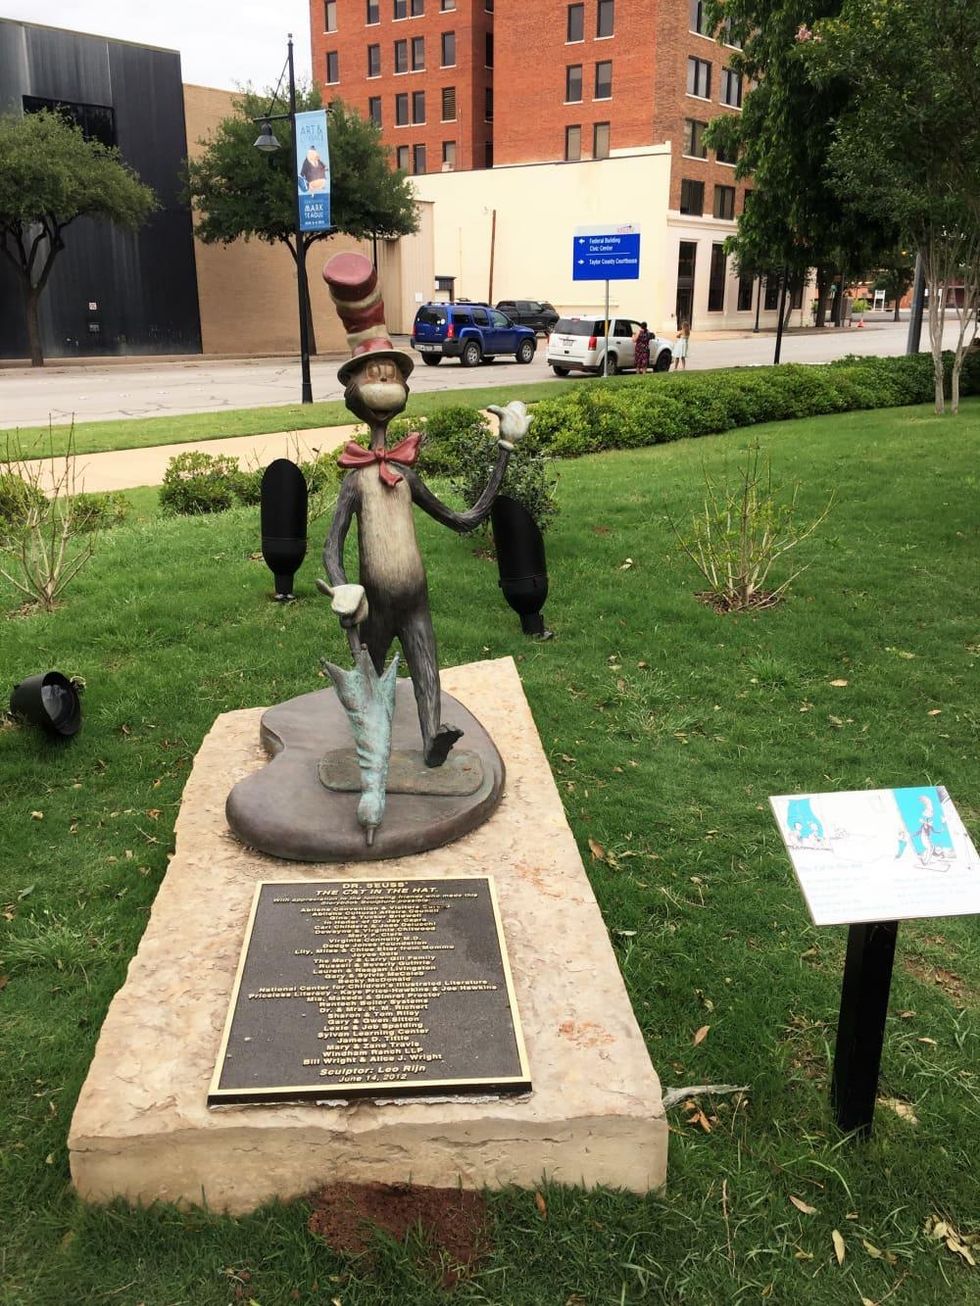 Storybook sculptures, abilene, Texas, Cat in the Hat, Dr Seuss